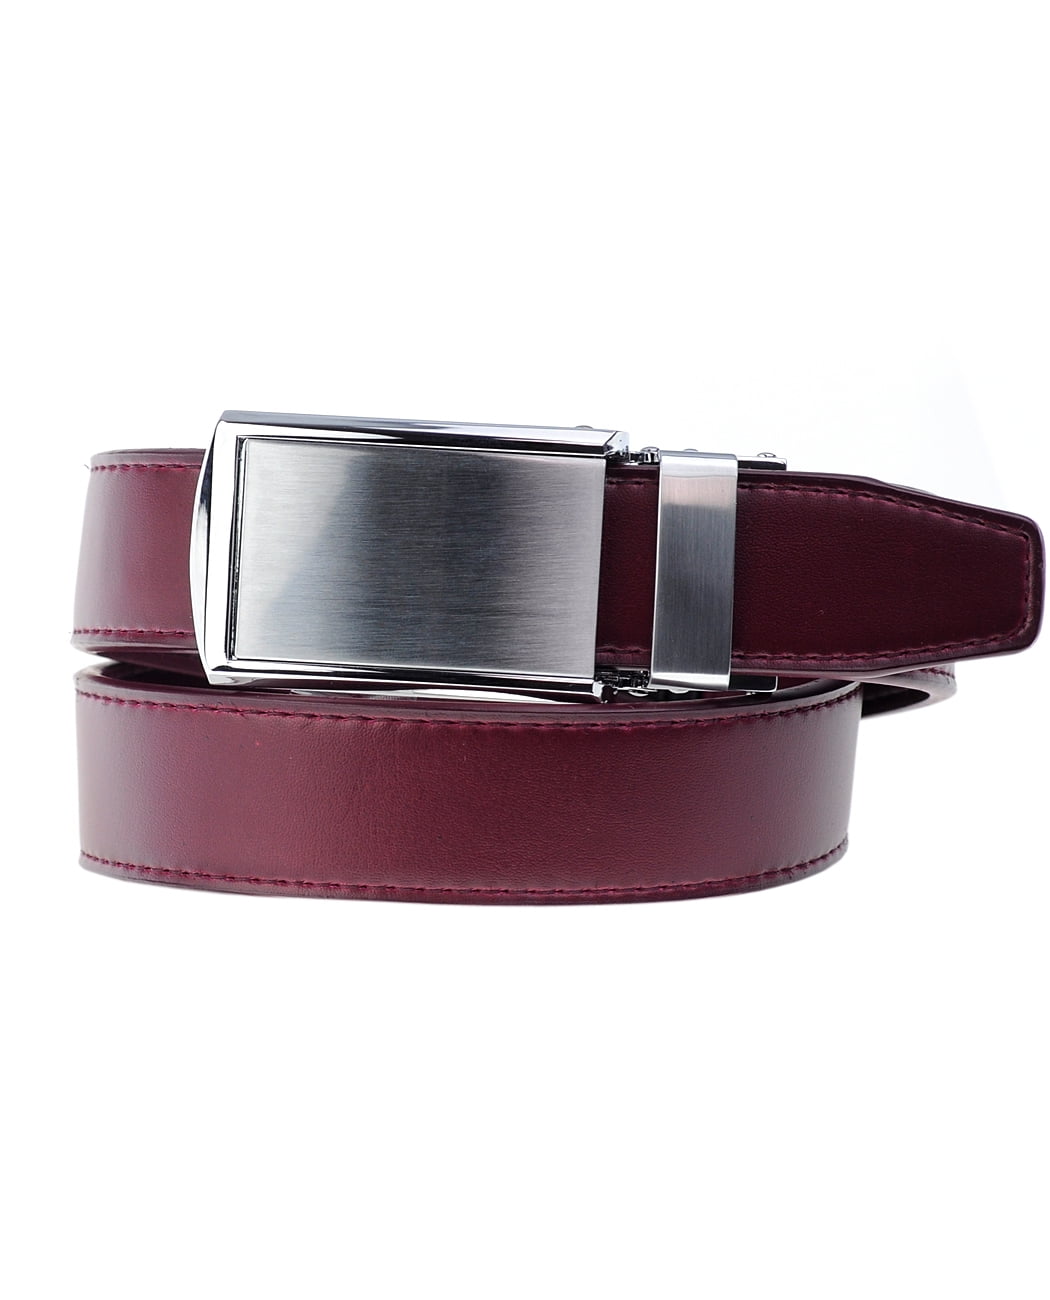 Men's Genuine Leather Ratchet Dress Belt with Automatic Buckle - DS7869 ...